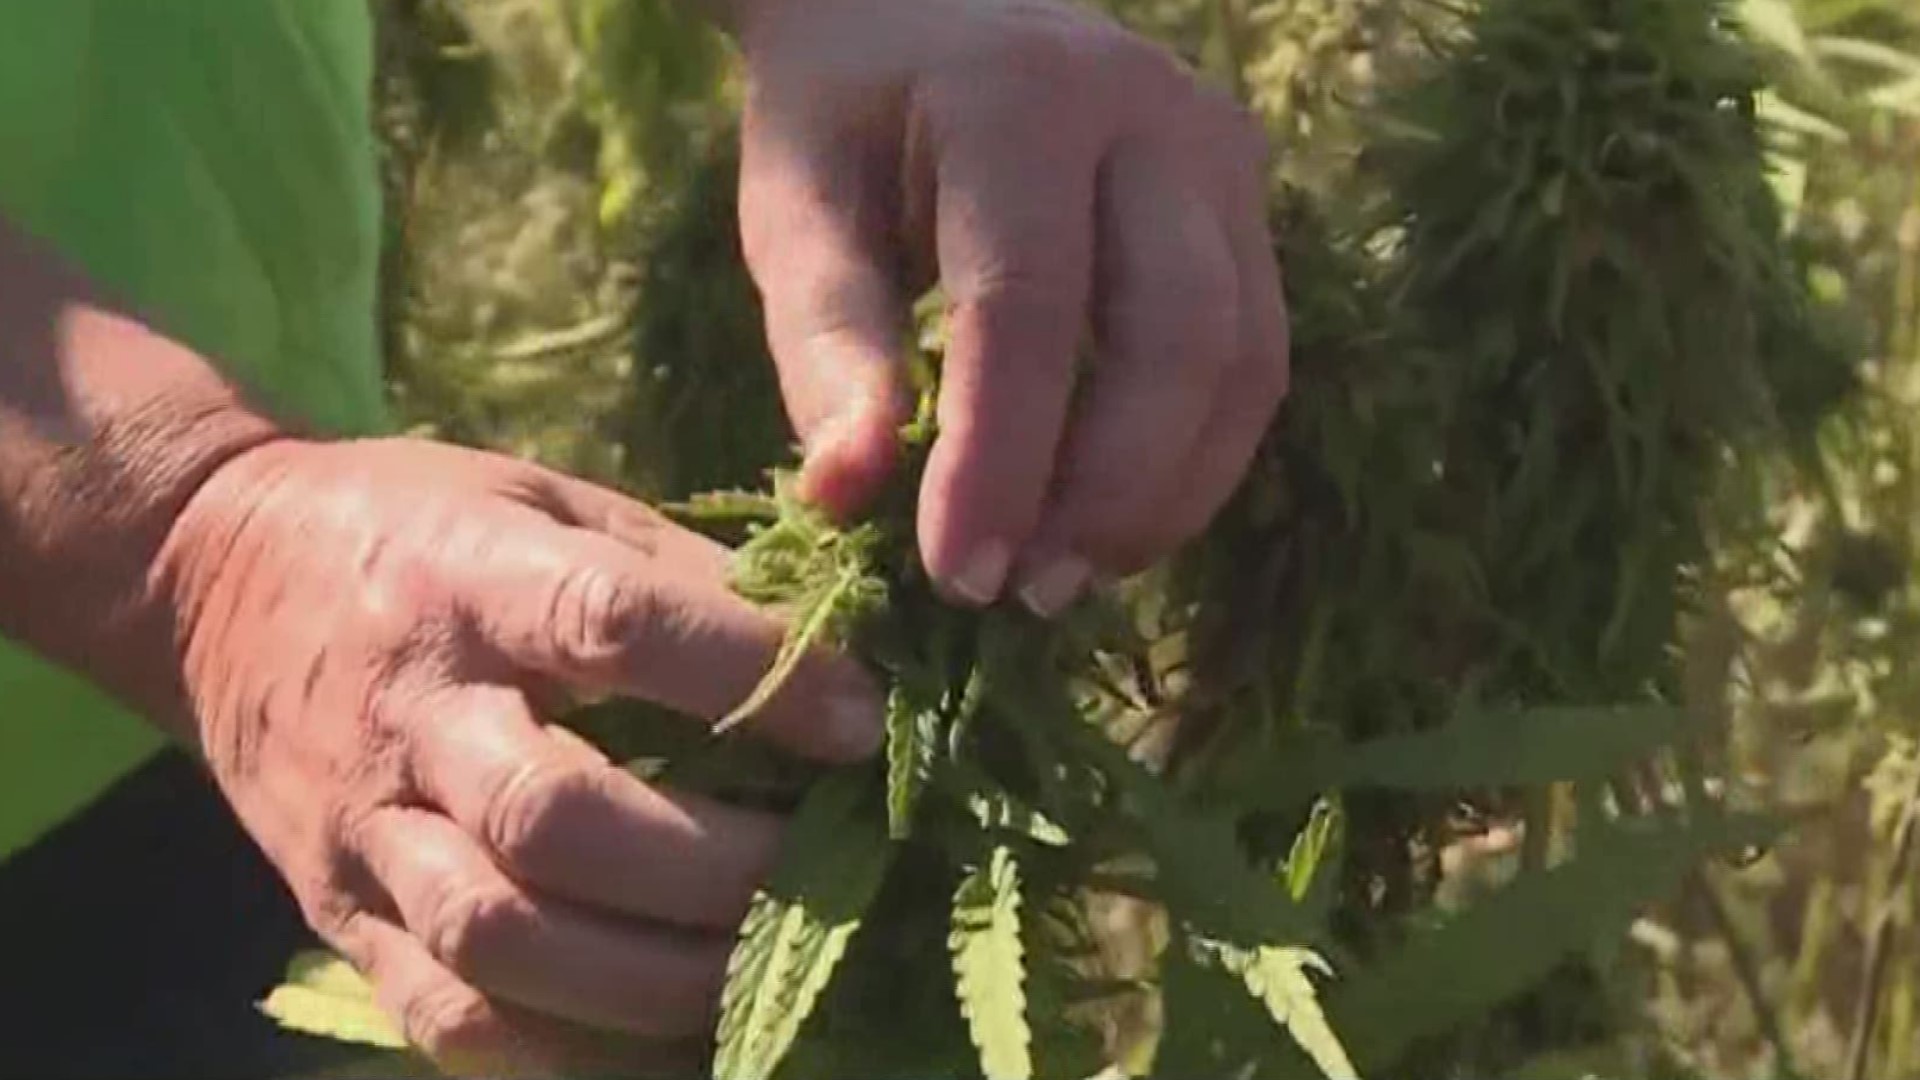 Florida’s director of cannabis is excited about rolling out the state’s first draft of rules for growing hemp. 

The crop is expected to generate billions of dollars for Florida’s economy while adding jobs and diversity to the state’s agricultural industry.

“For those of you watching closely, you know this is an exciting time in Florida. We’re on the verge of creating a whole new hemp economy with billions in economic potential,” Holly Bell said in a video released by the state Department of Agriculture and Consumer Services this month.